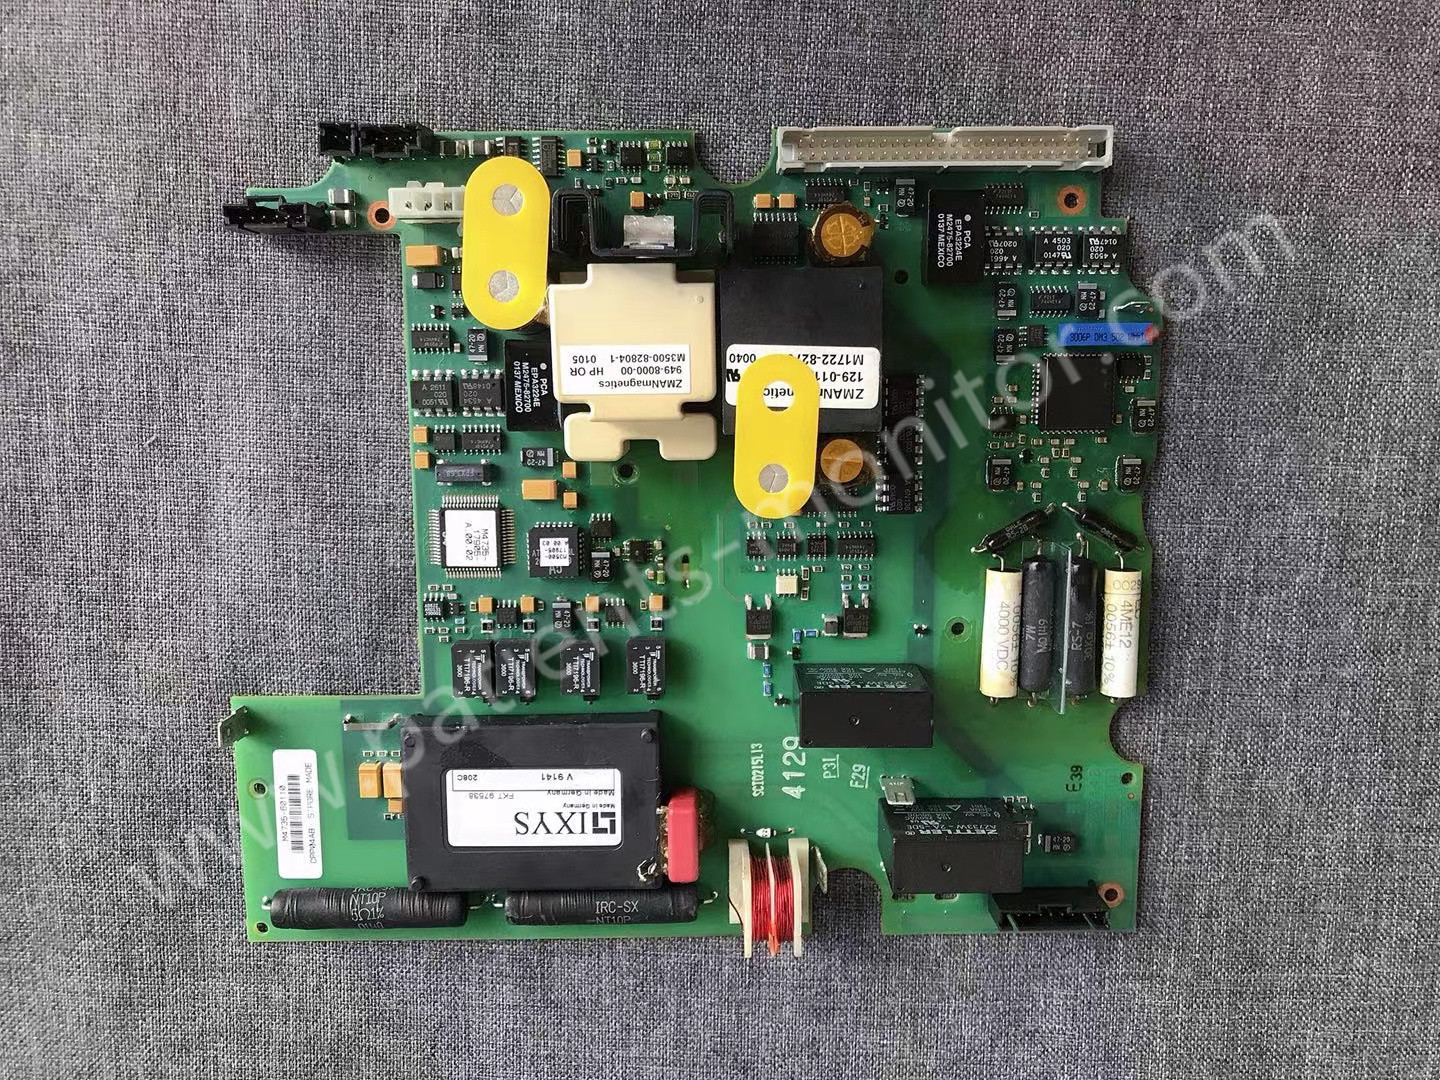 Buy PH Heartstat XL M4735A Defibrillator Machine Parts Monitor High Voltage Board Power PCA Board at wholesale prices